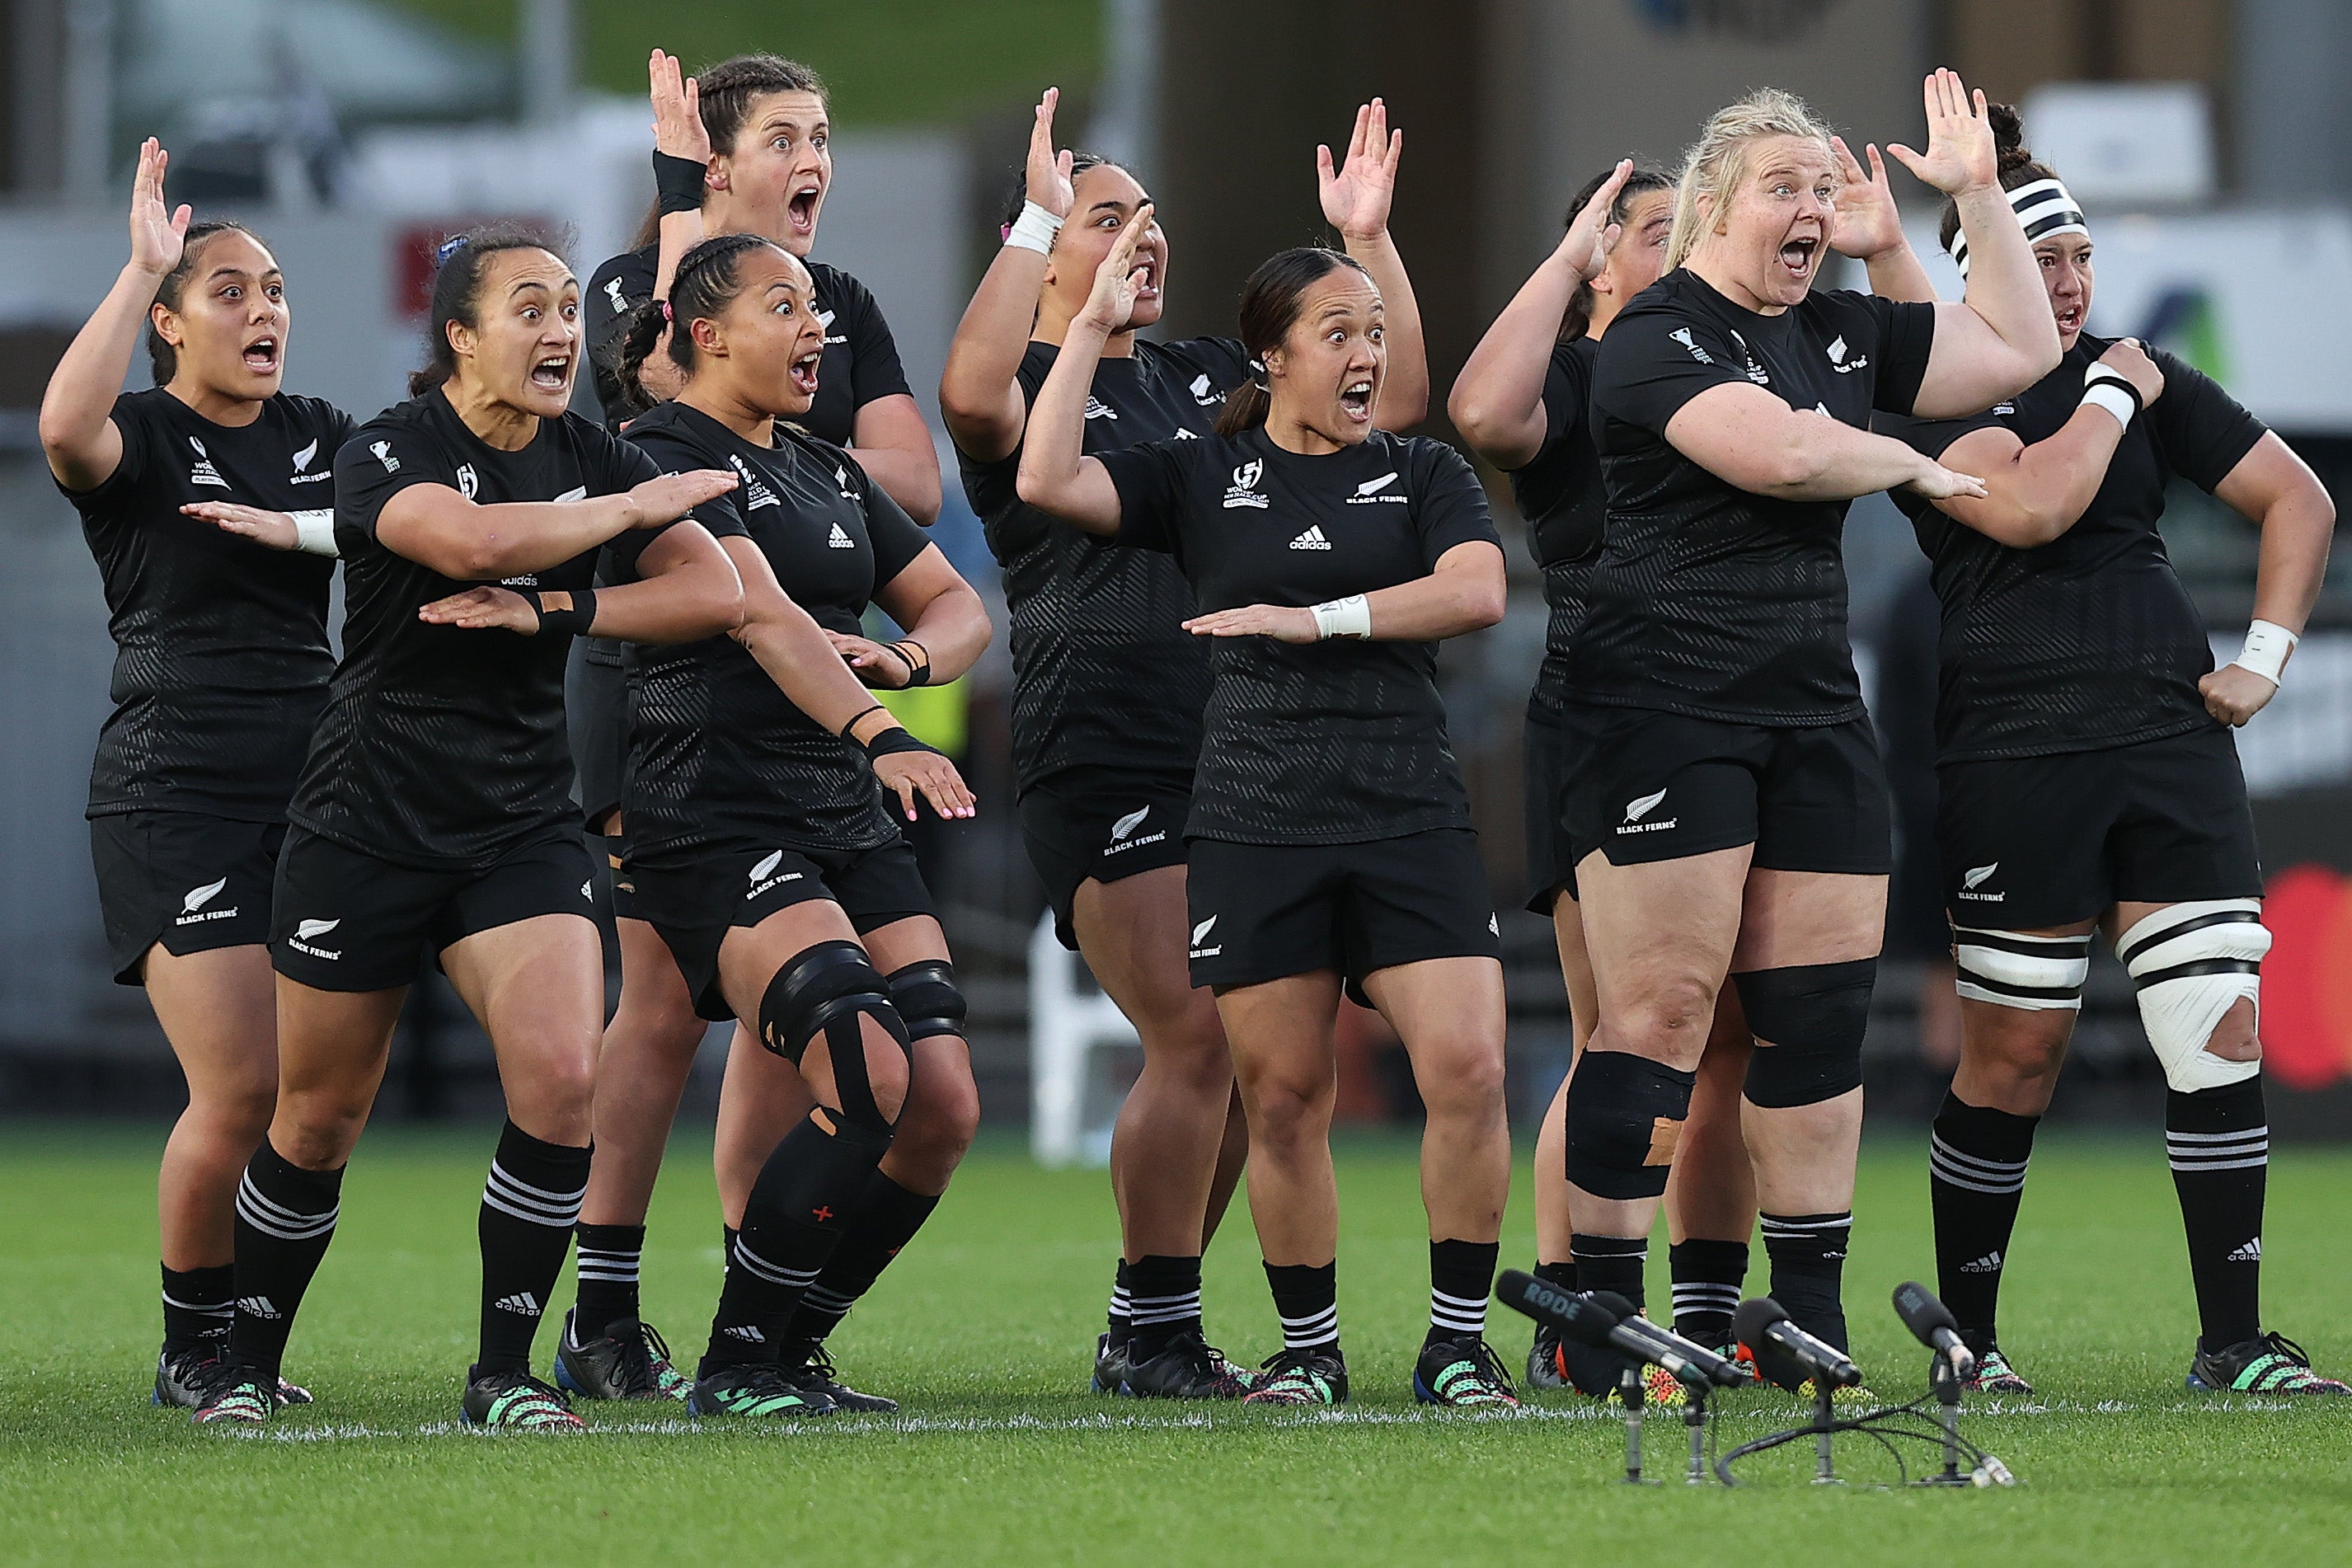 The Black Ferns face Wales in their Rugby World Cup quarter-final